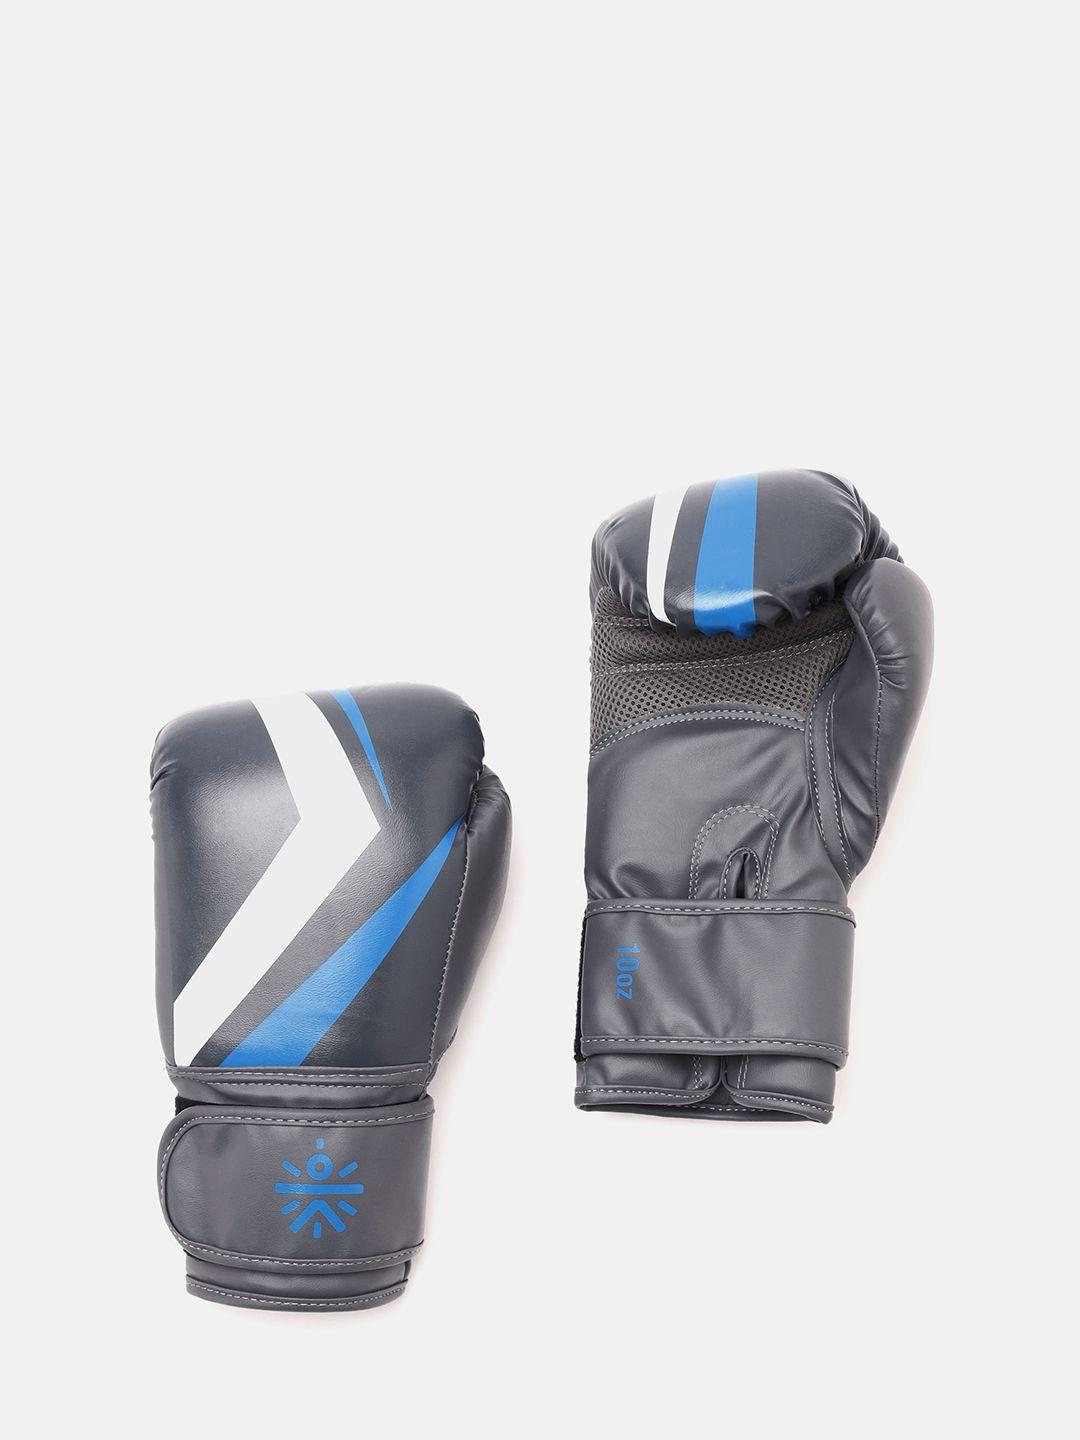 cultsportone pro boxing gloves with antimicrobial lining